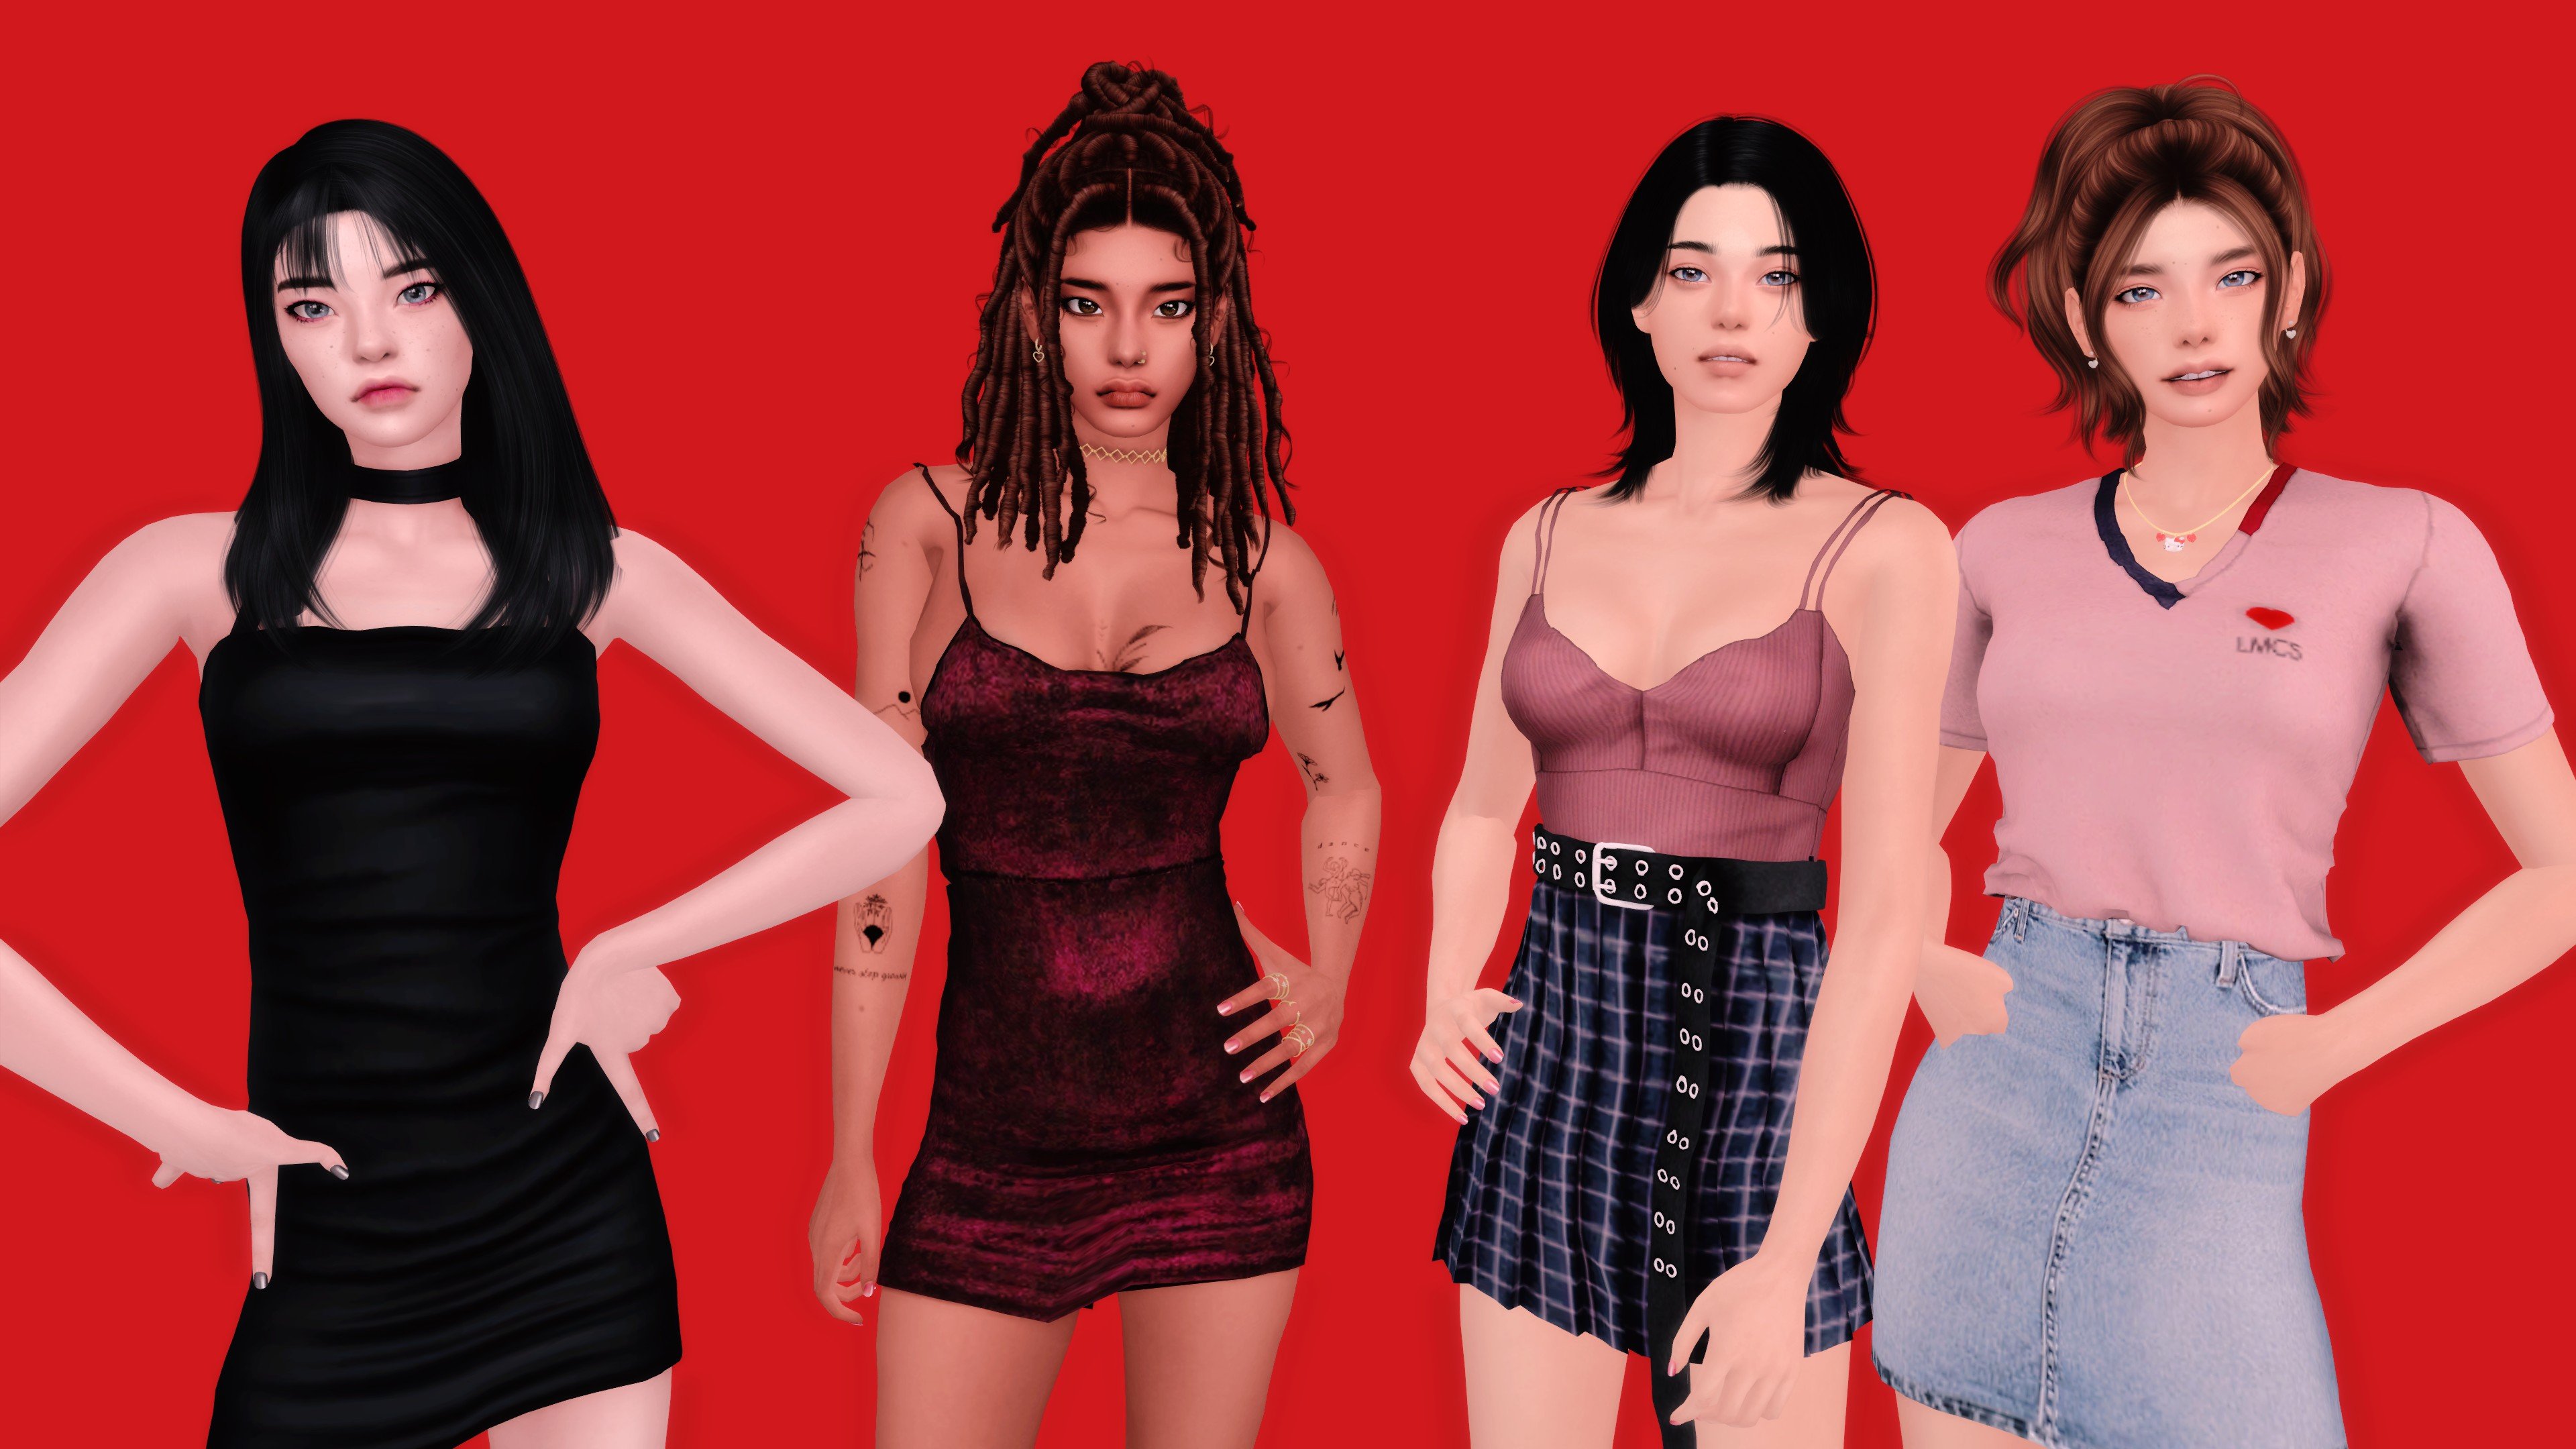 Female sims by vs202 (12 sims available)